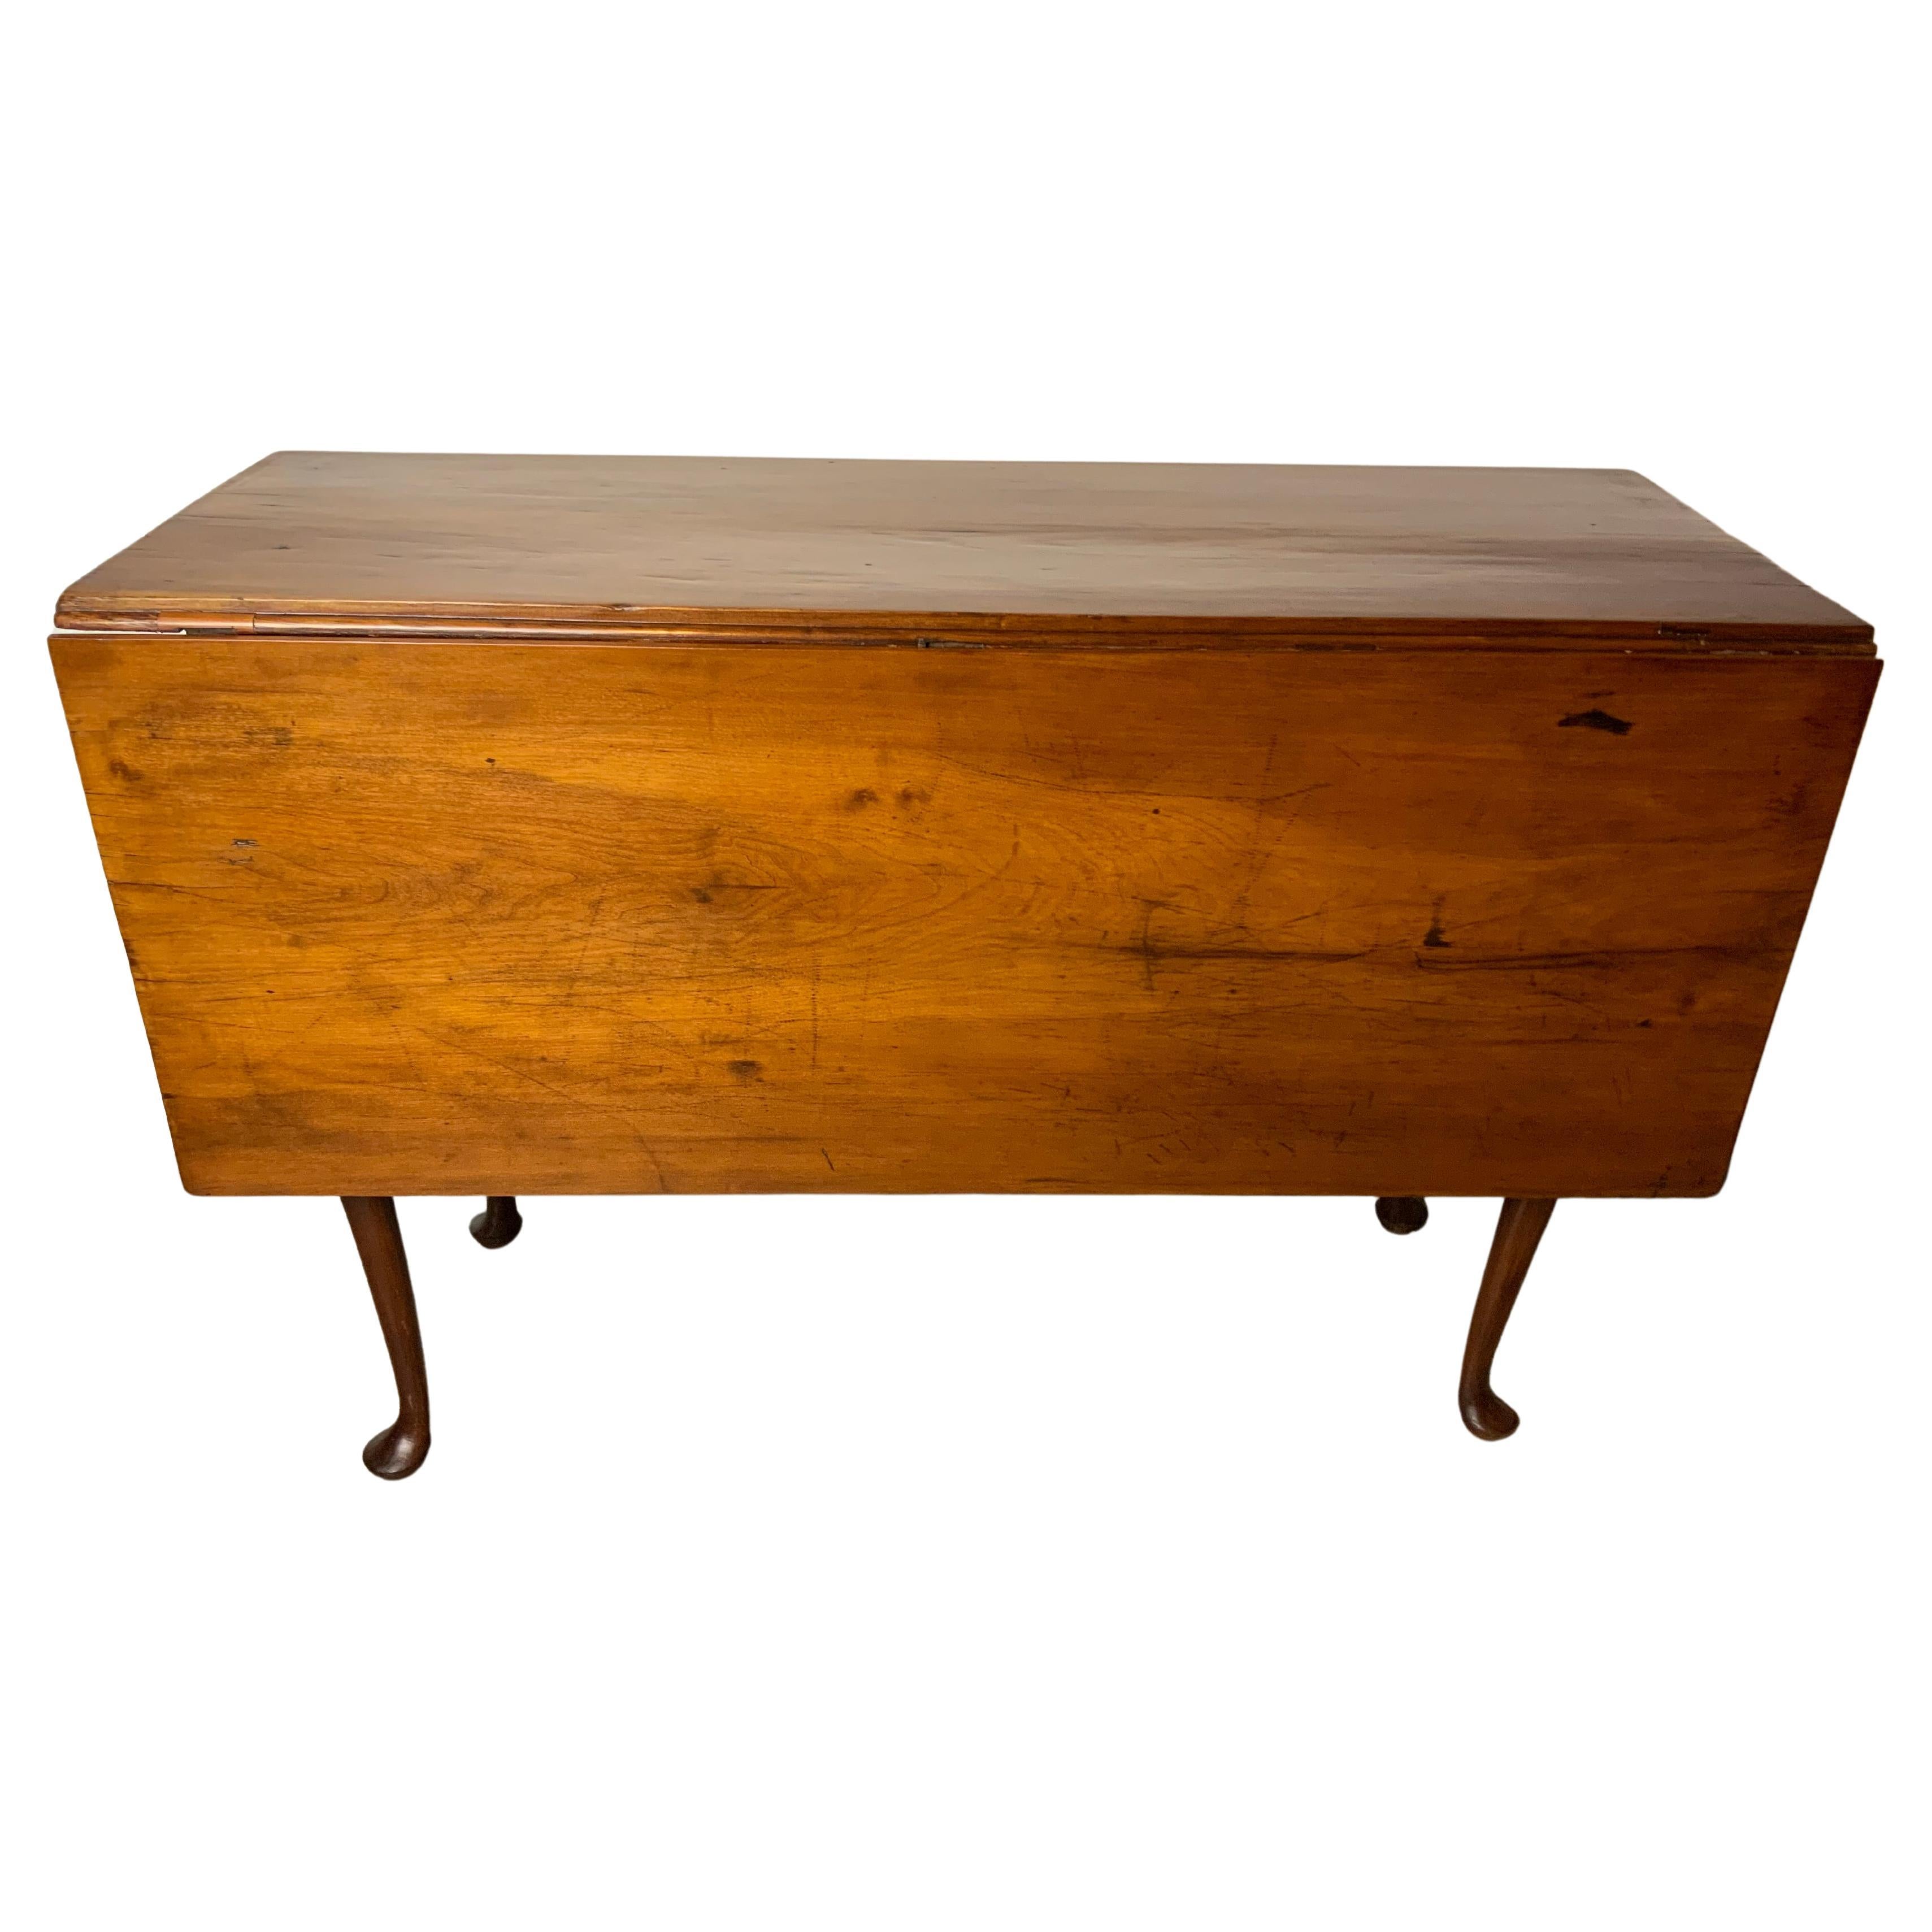 Queen Anne Cherry Drop Leaf Table